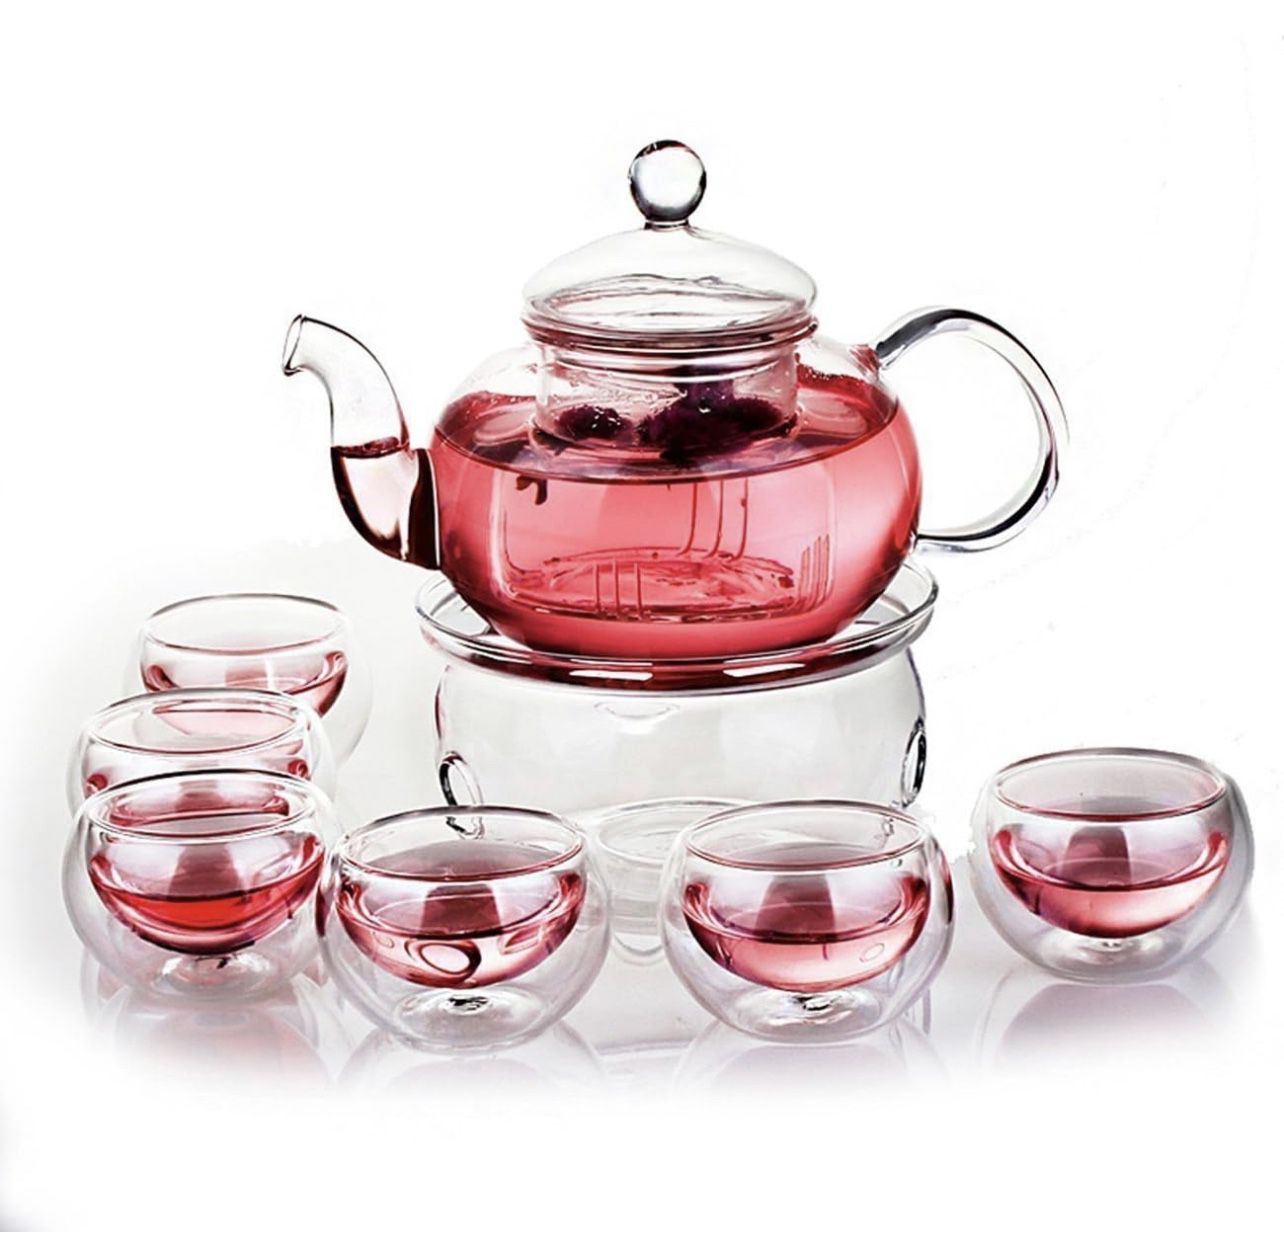 Glass Filtering Tea Maker Teapot with a Warmer and 6 Tea Cups Set 